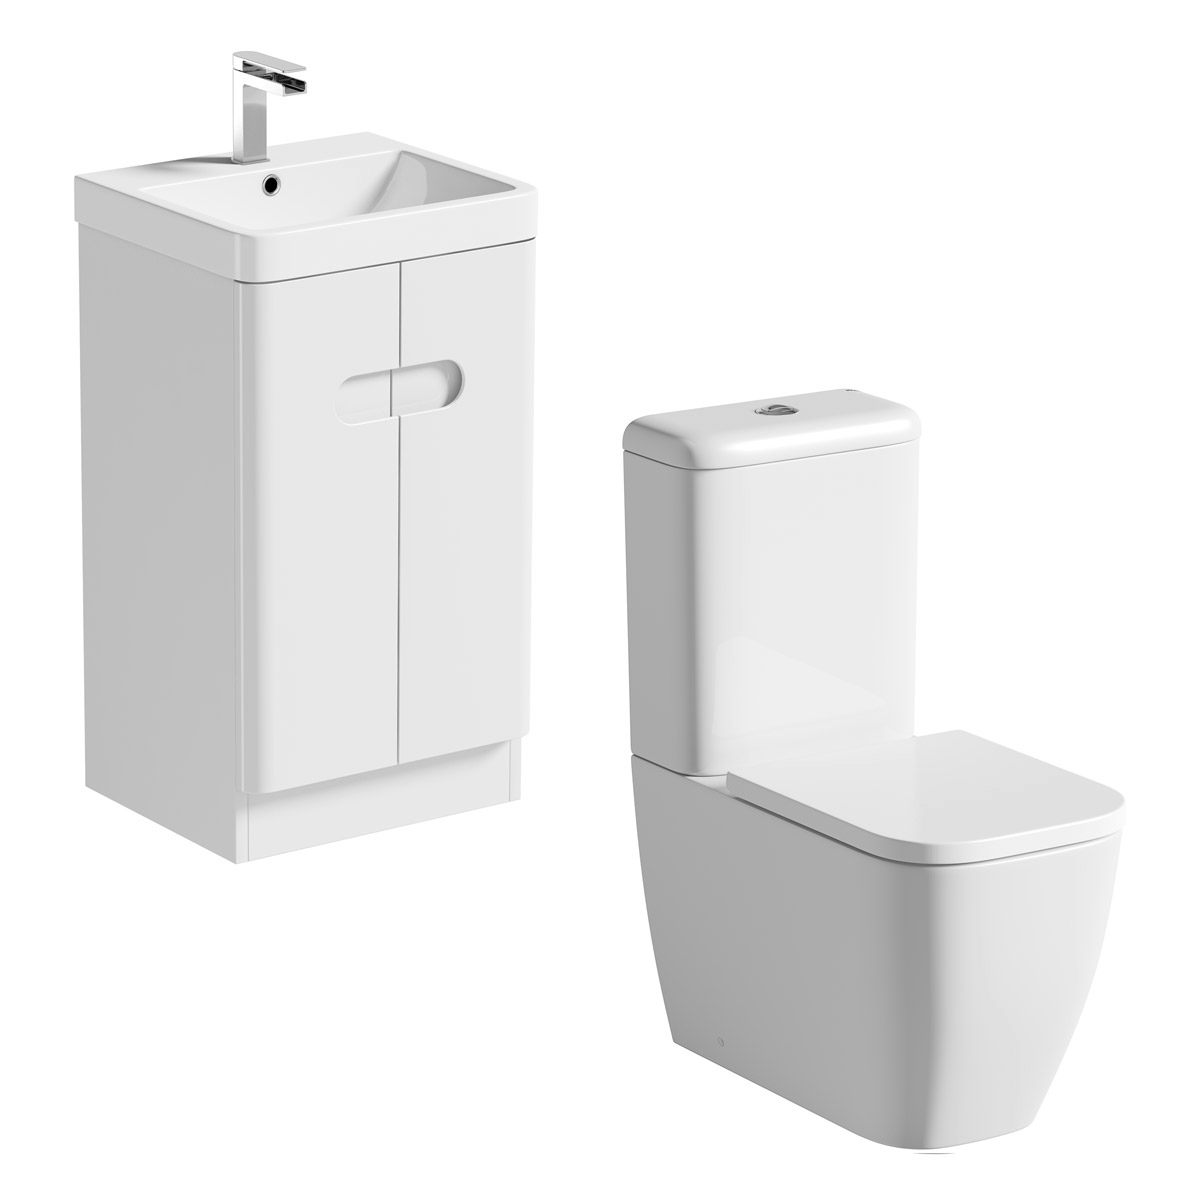 Mode Ellis white cloakroom suite with close coupled toilet